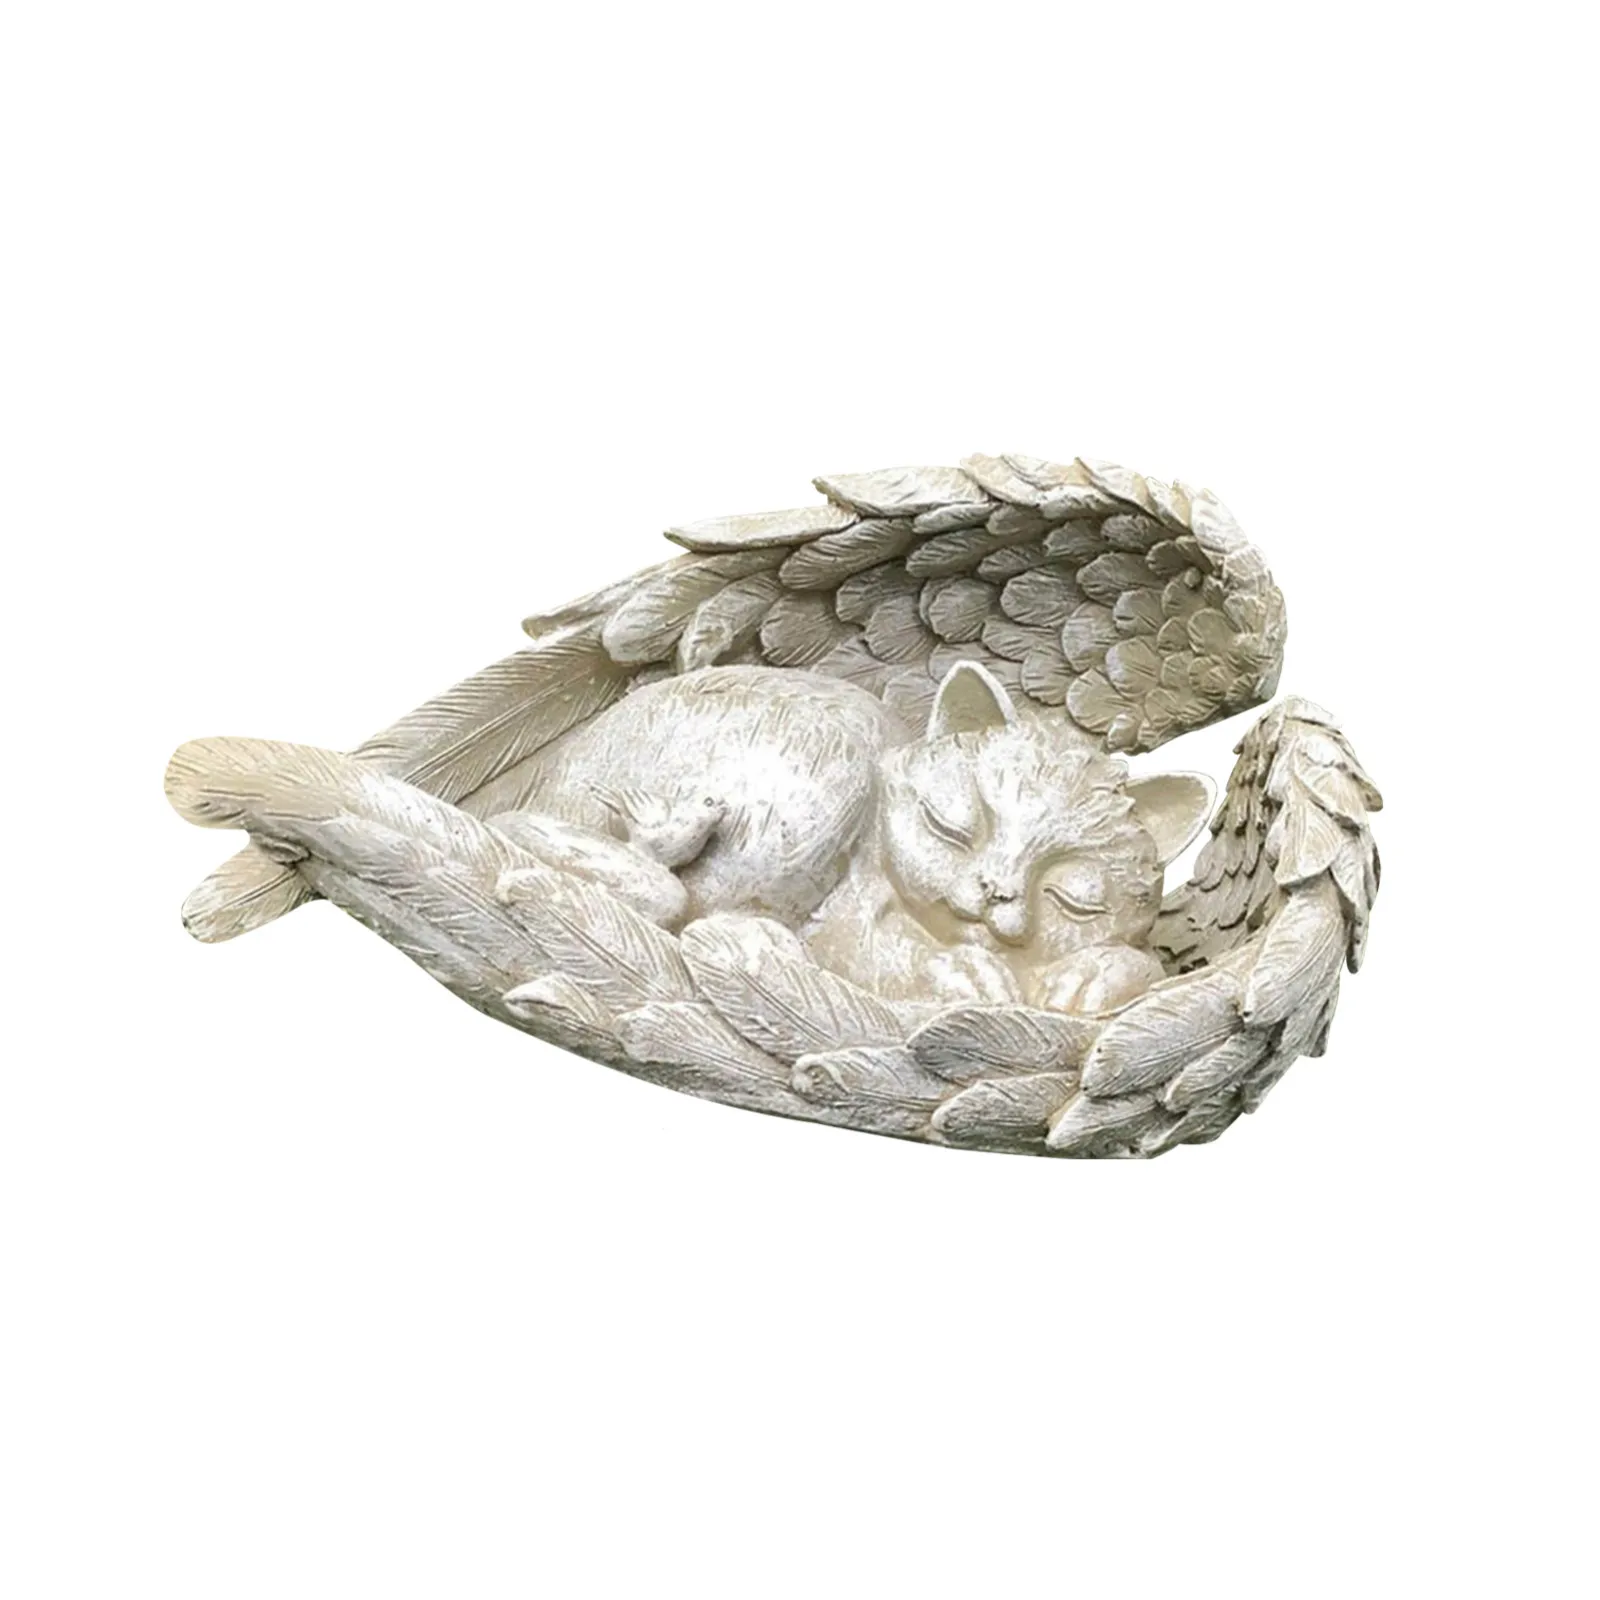 DOG MEMORIAL Sleeping Pet Or Cat With Wing Angel Statue Figurine 12cm Stone with Angel Wings Garden Decor for Outdoor Or Indoor